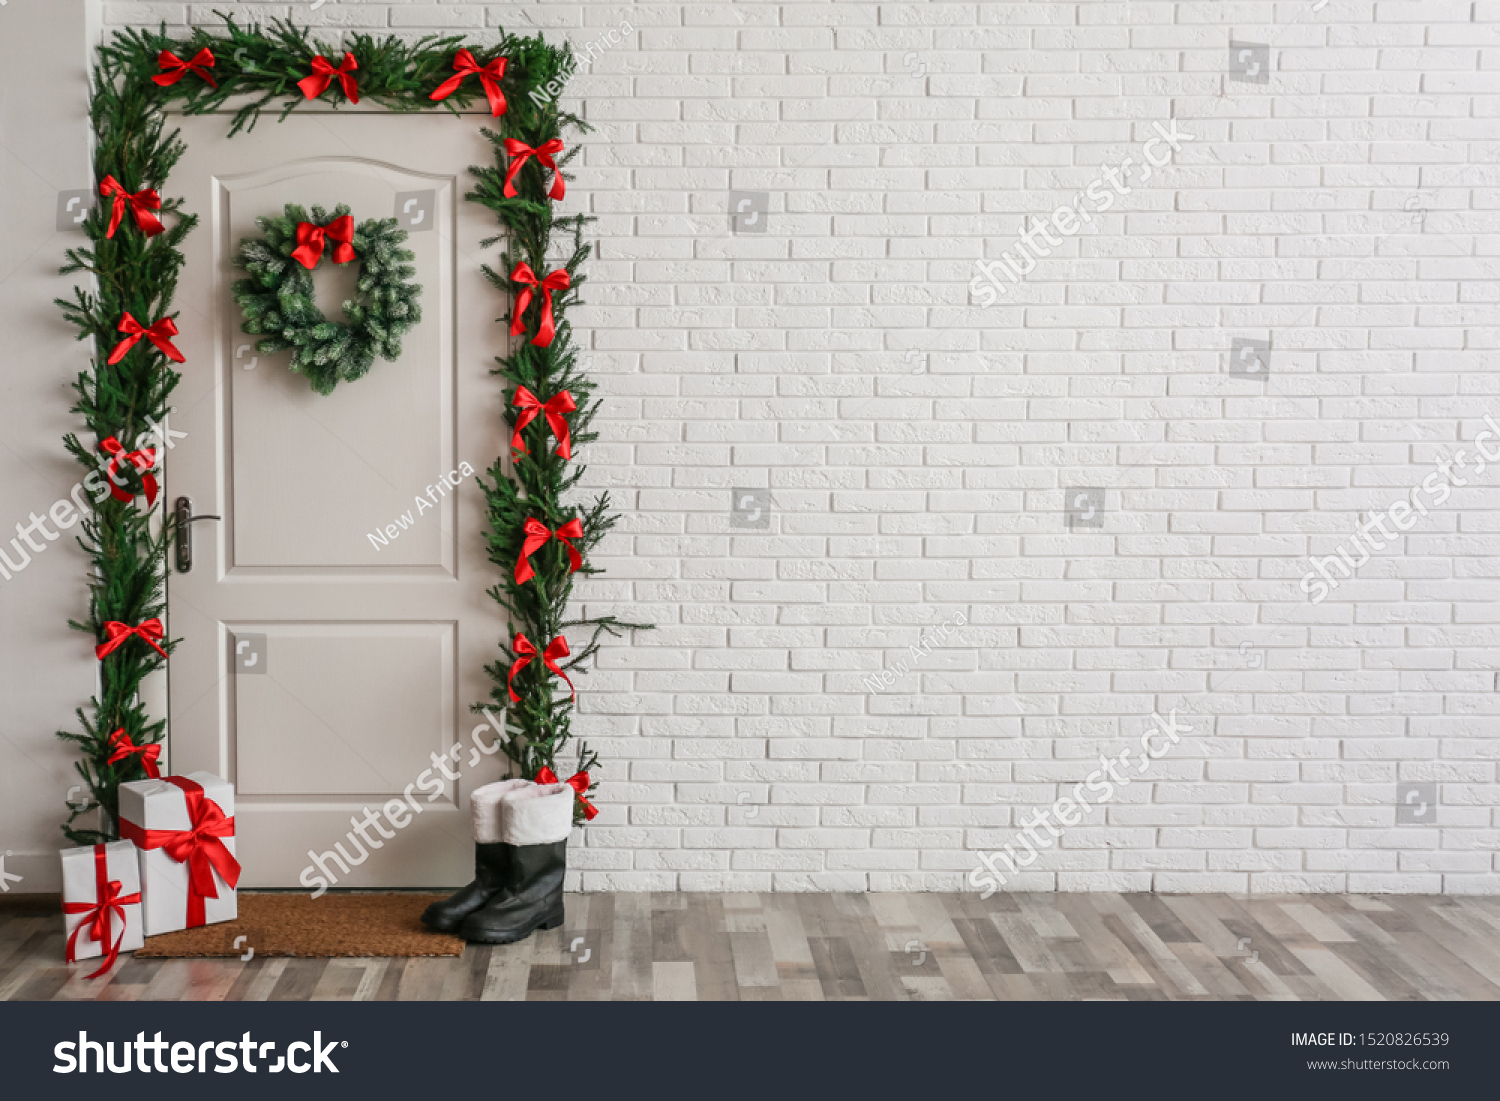 Stylish hallway interior with decorated door and Christmas gifts, space for text #1520826539